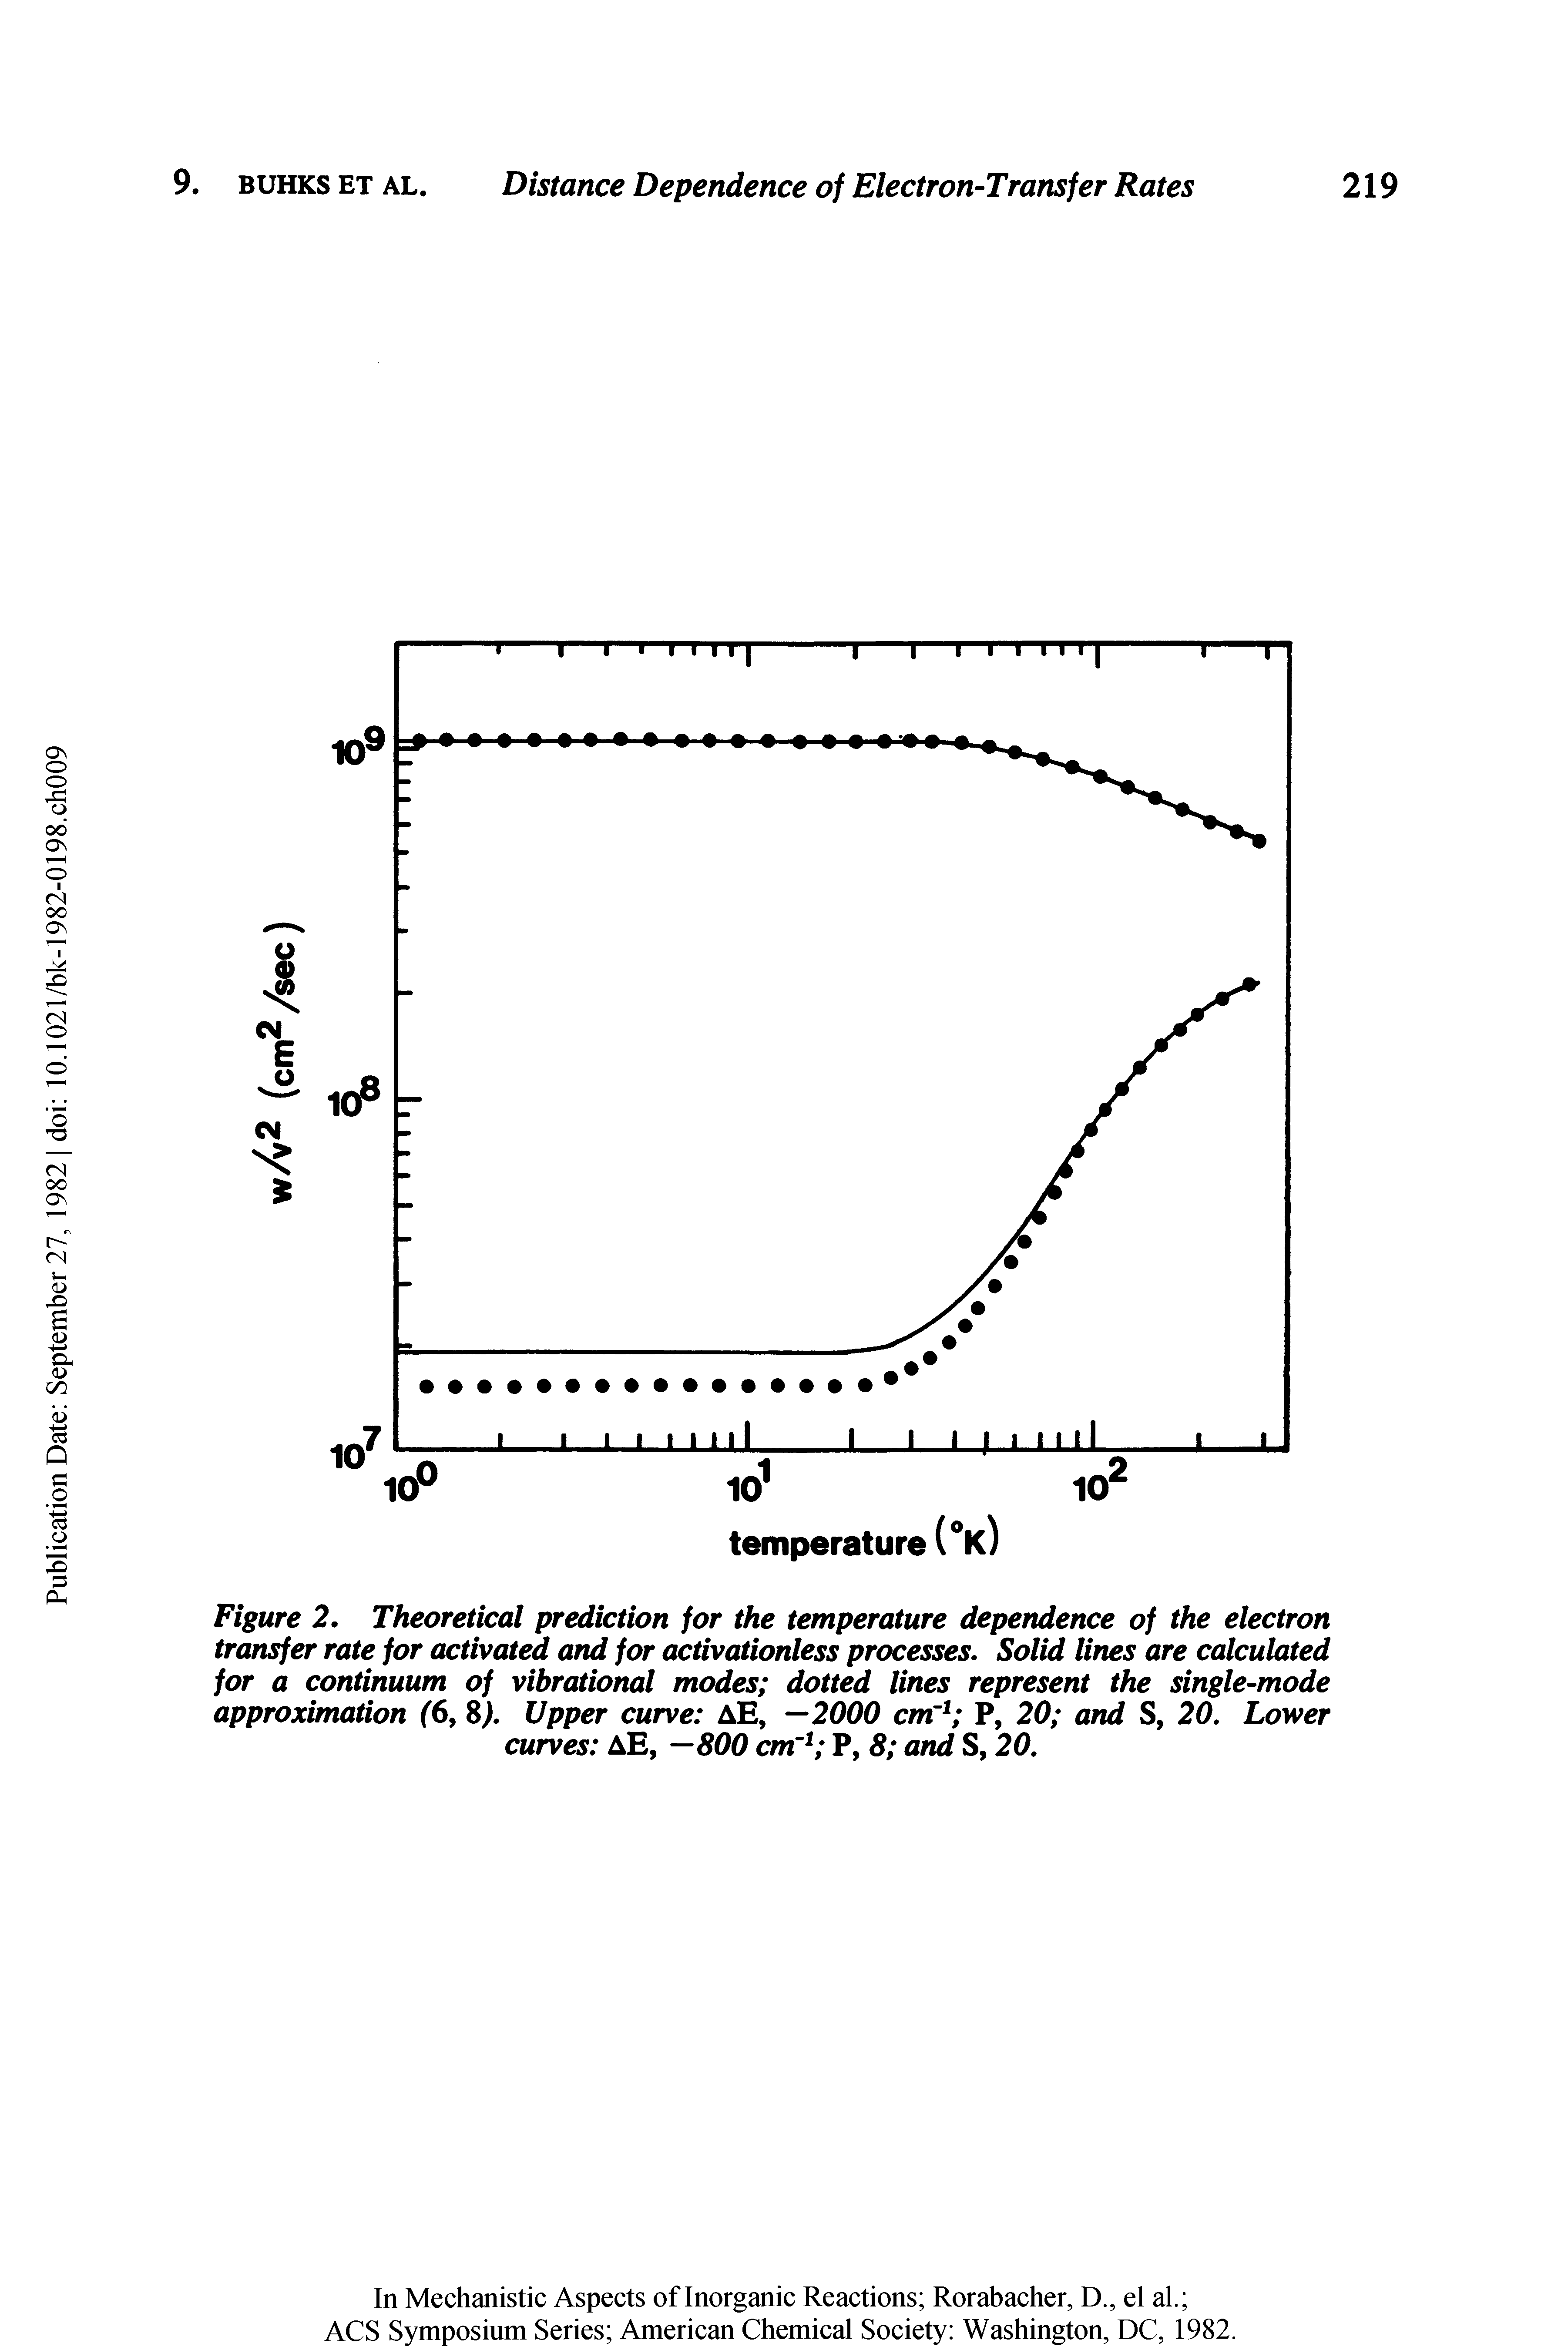 Figure 2. Theoretical prediction for the temperature dependence of the electron transfer rate for activated and for activationless processes. Solid lines are calculated for a continuum of vibrational modes dotted lines represent the single-mode approximation (6, 8). Upper curve AE, —2000 cm 1 P, 20 and S, 20. Lower curves AE, —800 cm"1 P, 8 and S, 20.